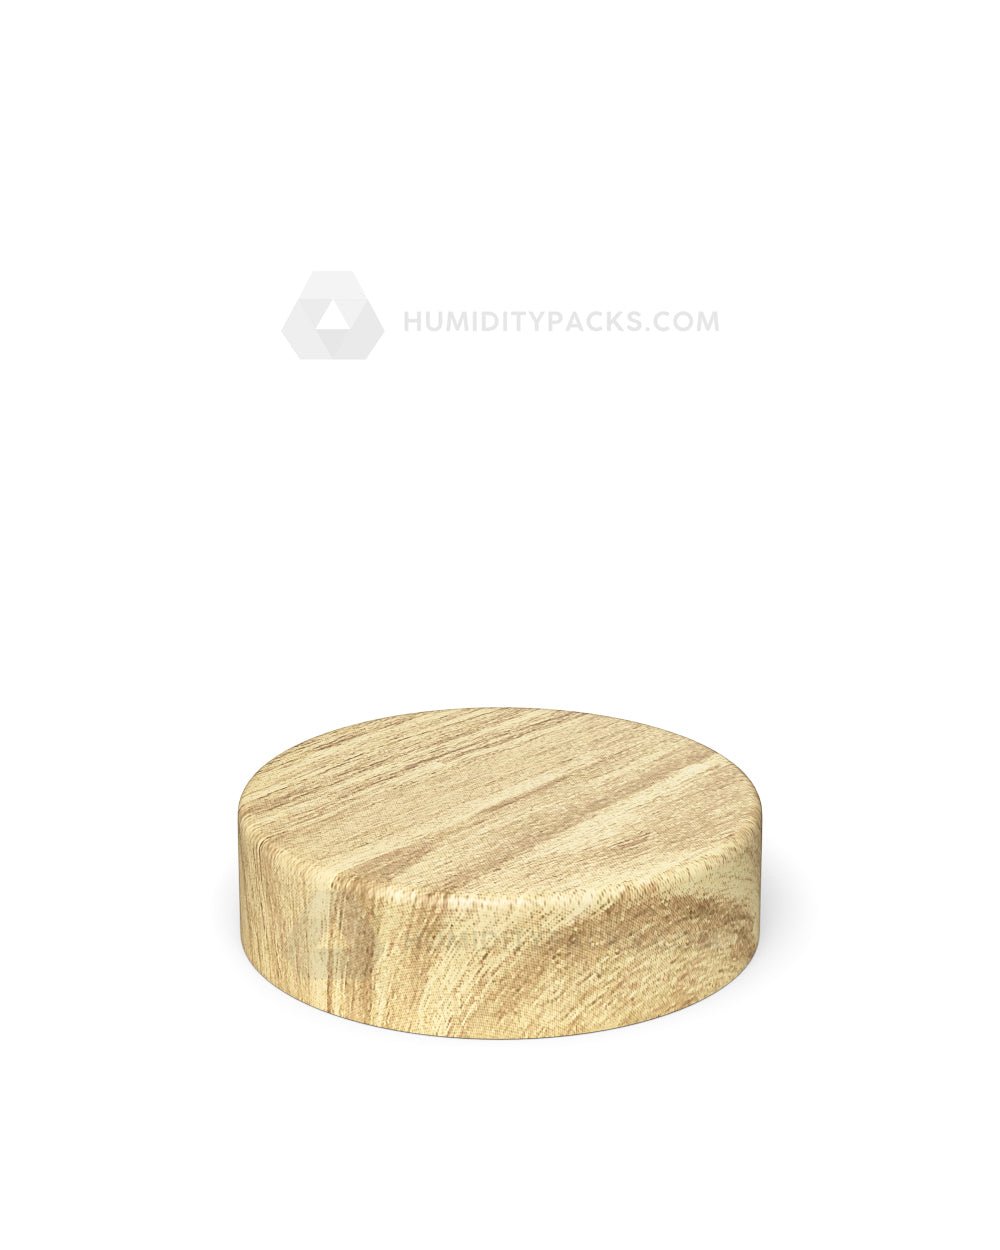 50mm Push and Turn Smooth Child Resistant Plastic Caps With Foam Liner - Maple Wood - 100/Box Humidity Packs - 3